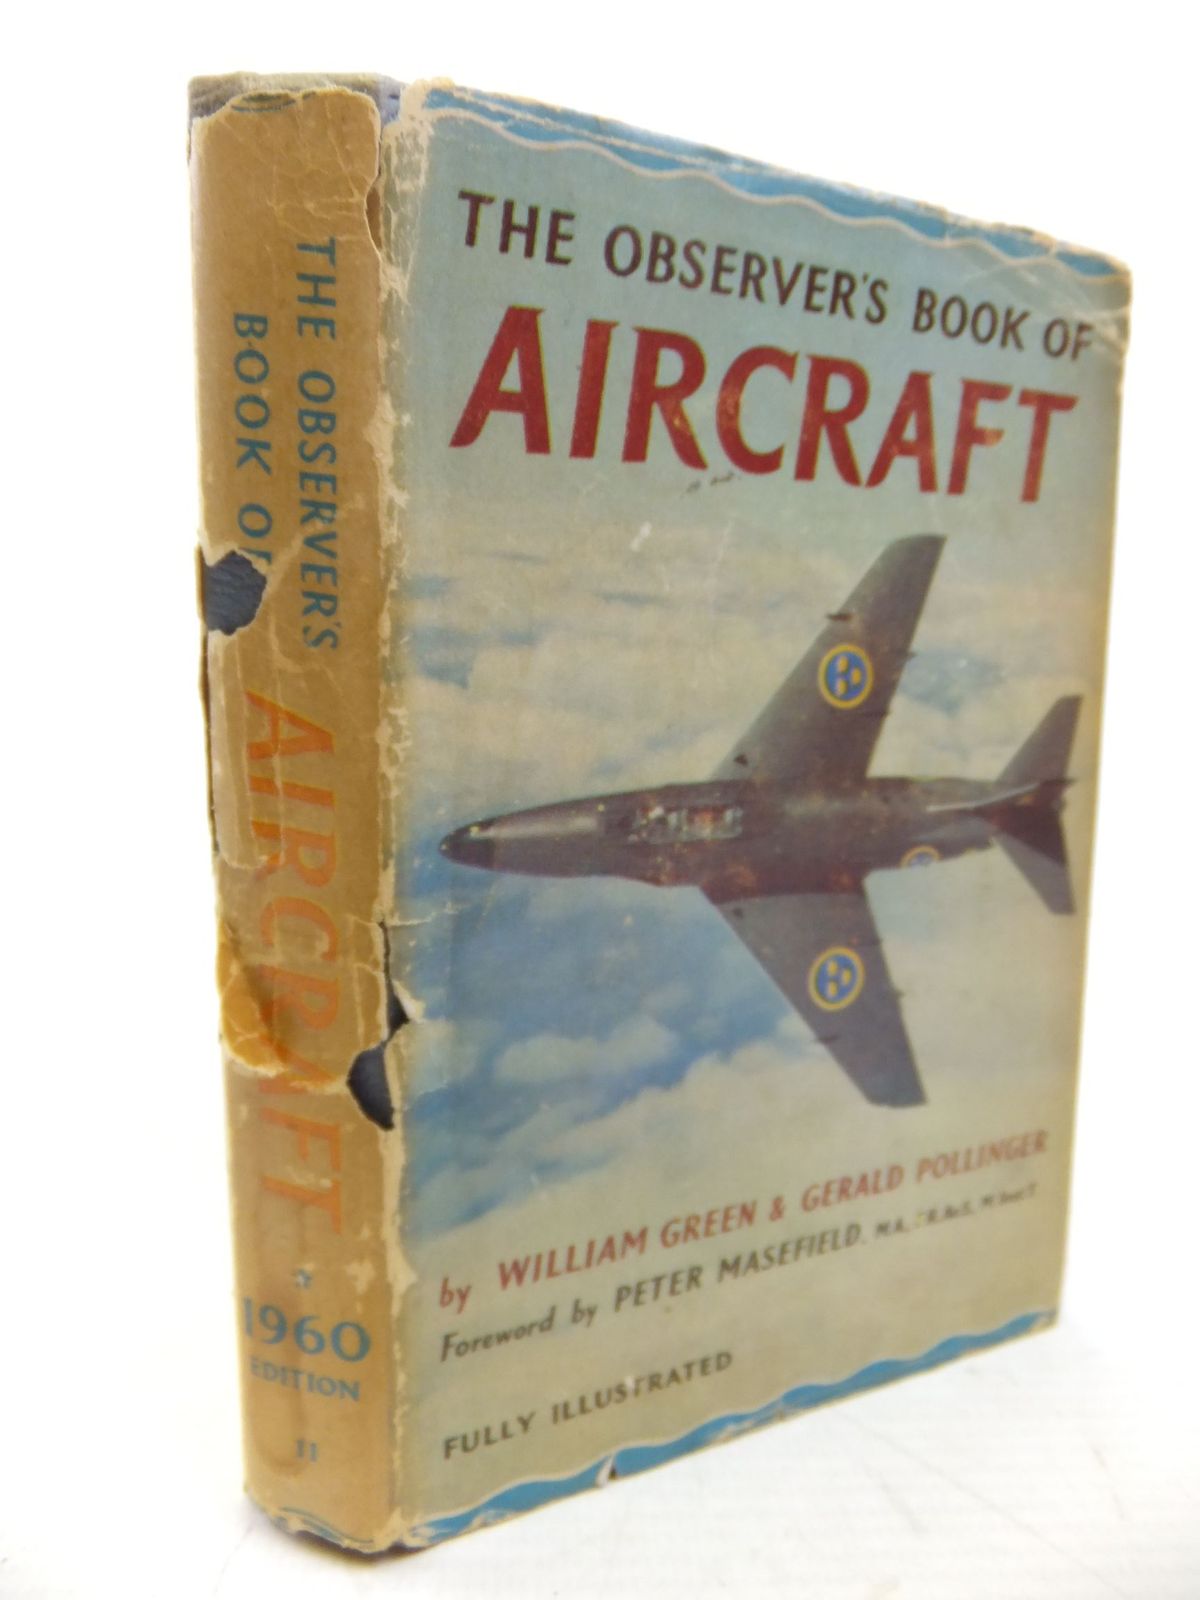 Stella & Rose's Books : THE OBSERVER'S BOOK OF AIRCRAFT Written By ...